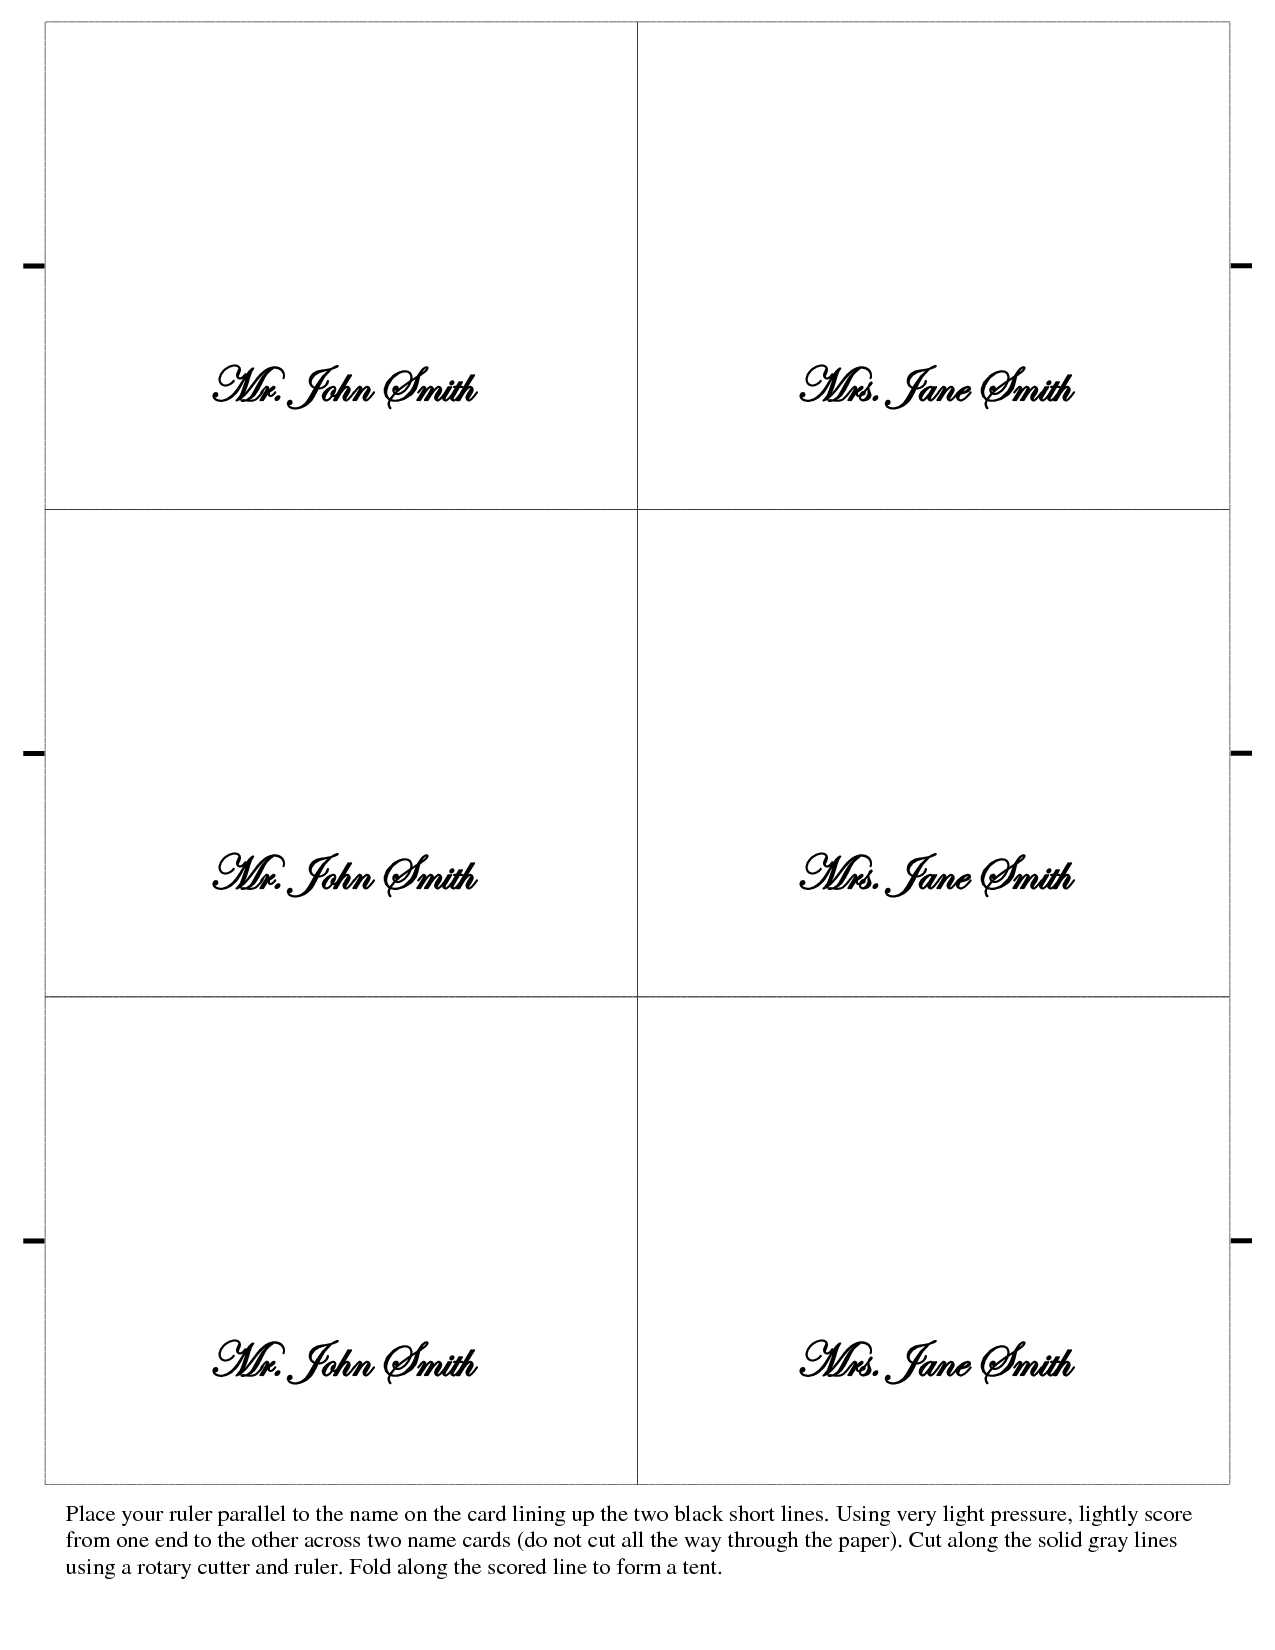 Free Place Card Templates 6 Per Page - Atlantaauctionco Within Place Card Template 6 Per Sheet